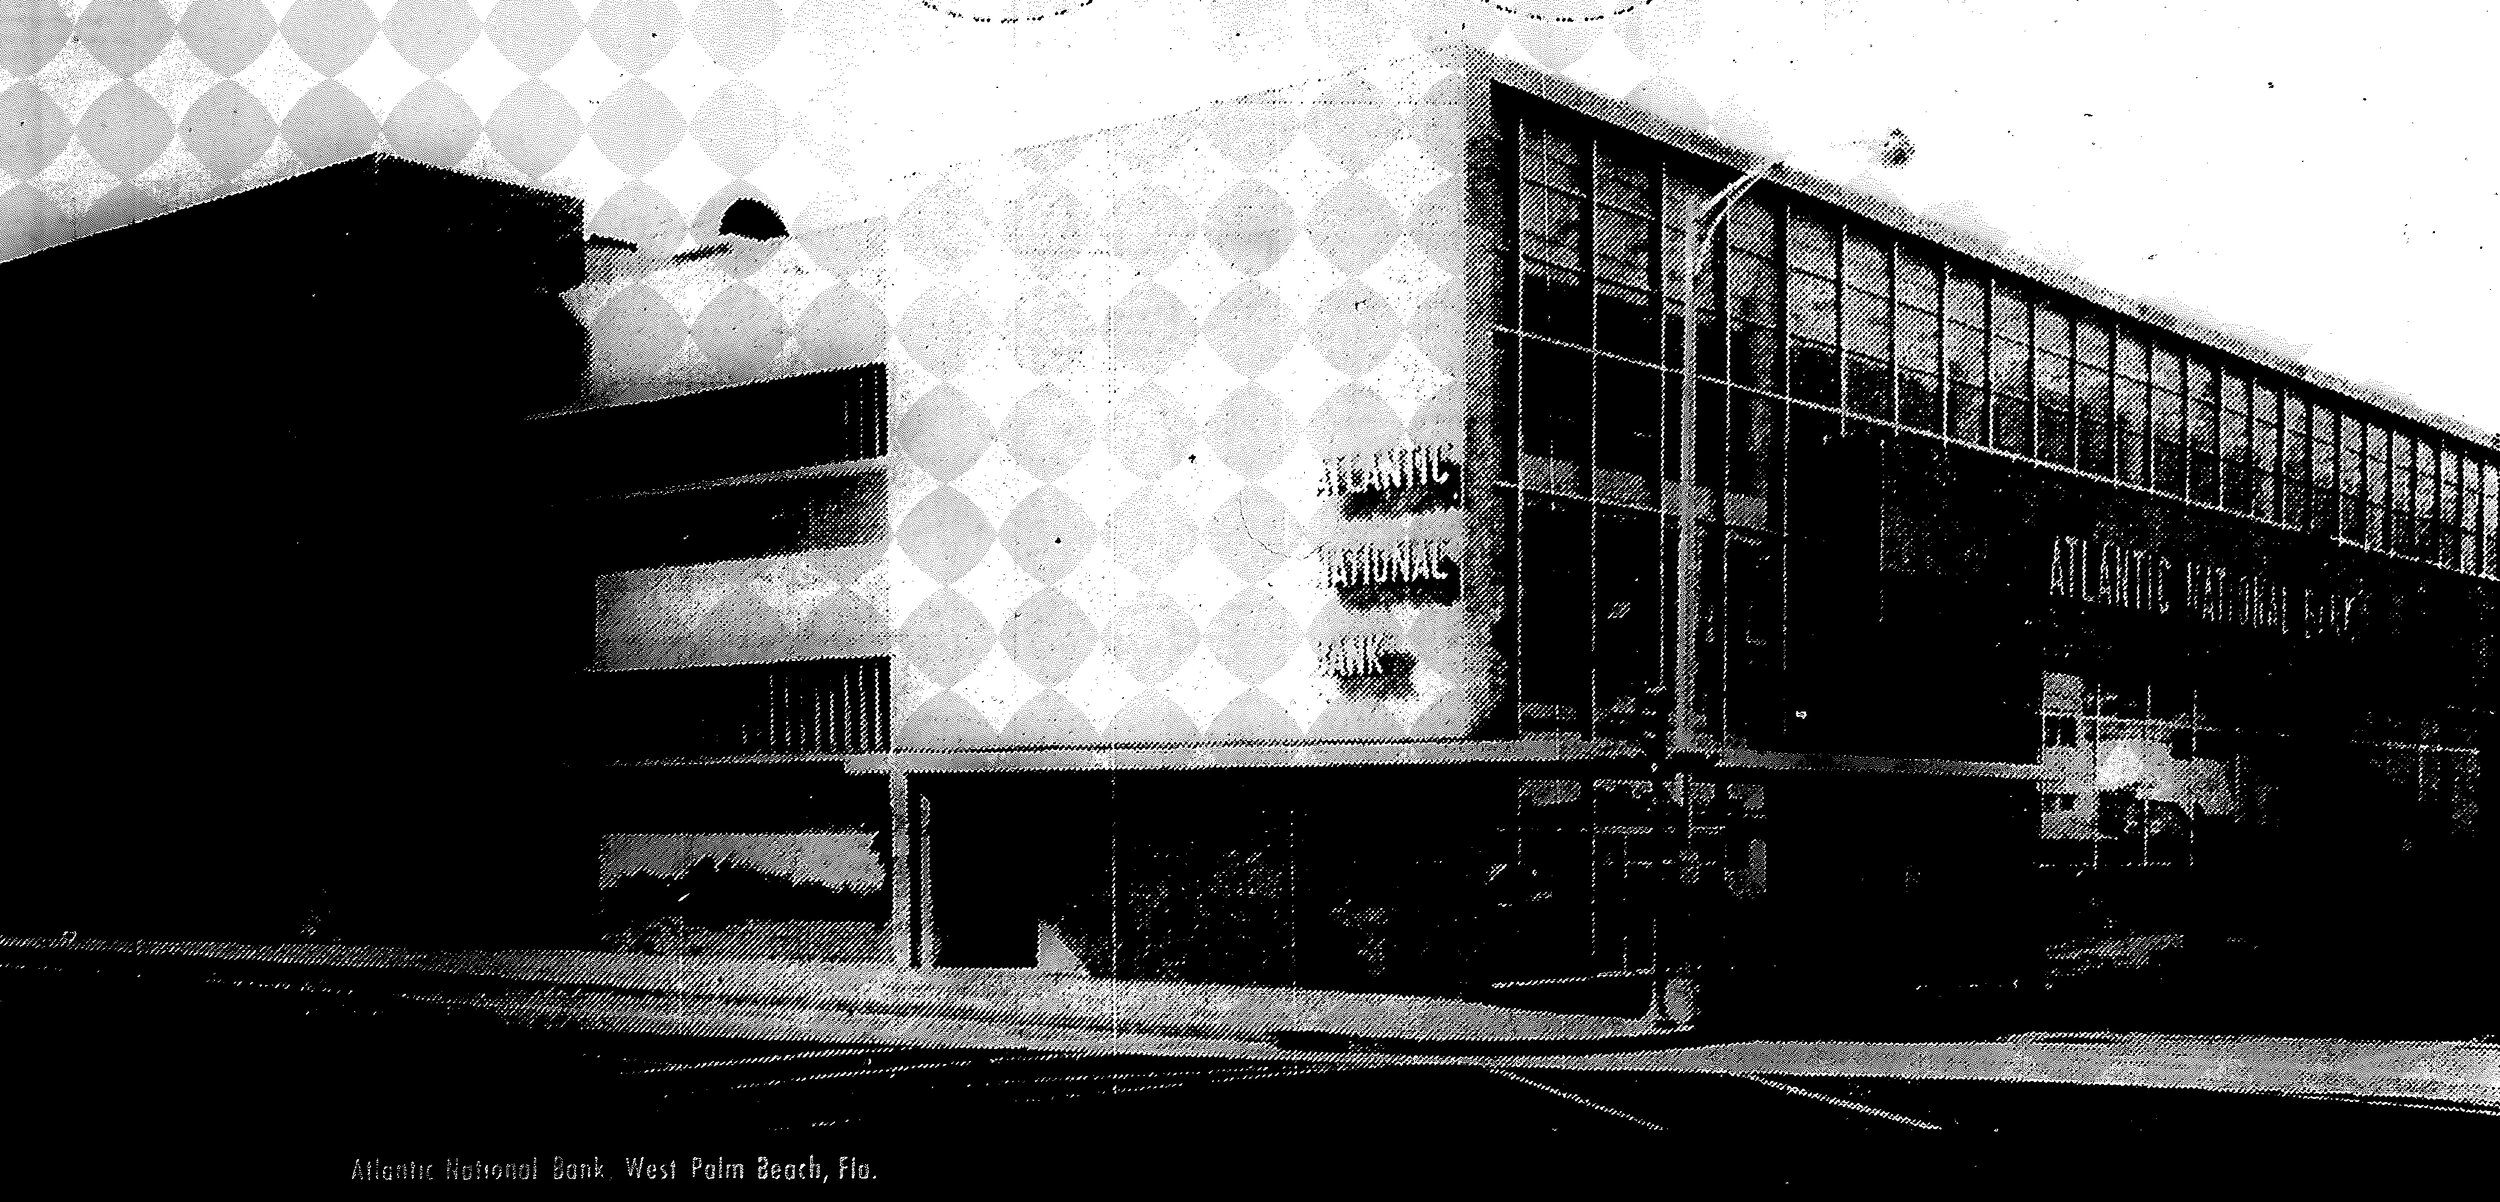 Atlantic National Bank West Palm Beach (FL) 1956 from The American Banker Reprinted with Permission from SourceMedia.jpg